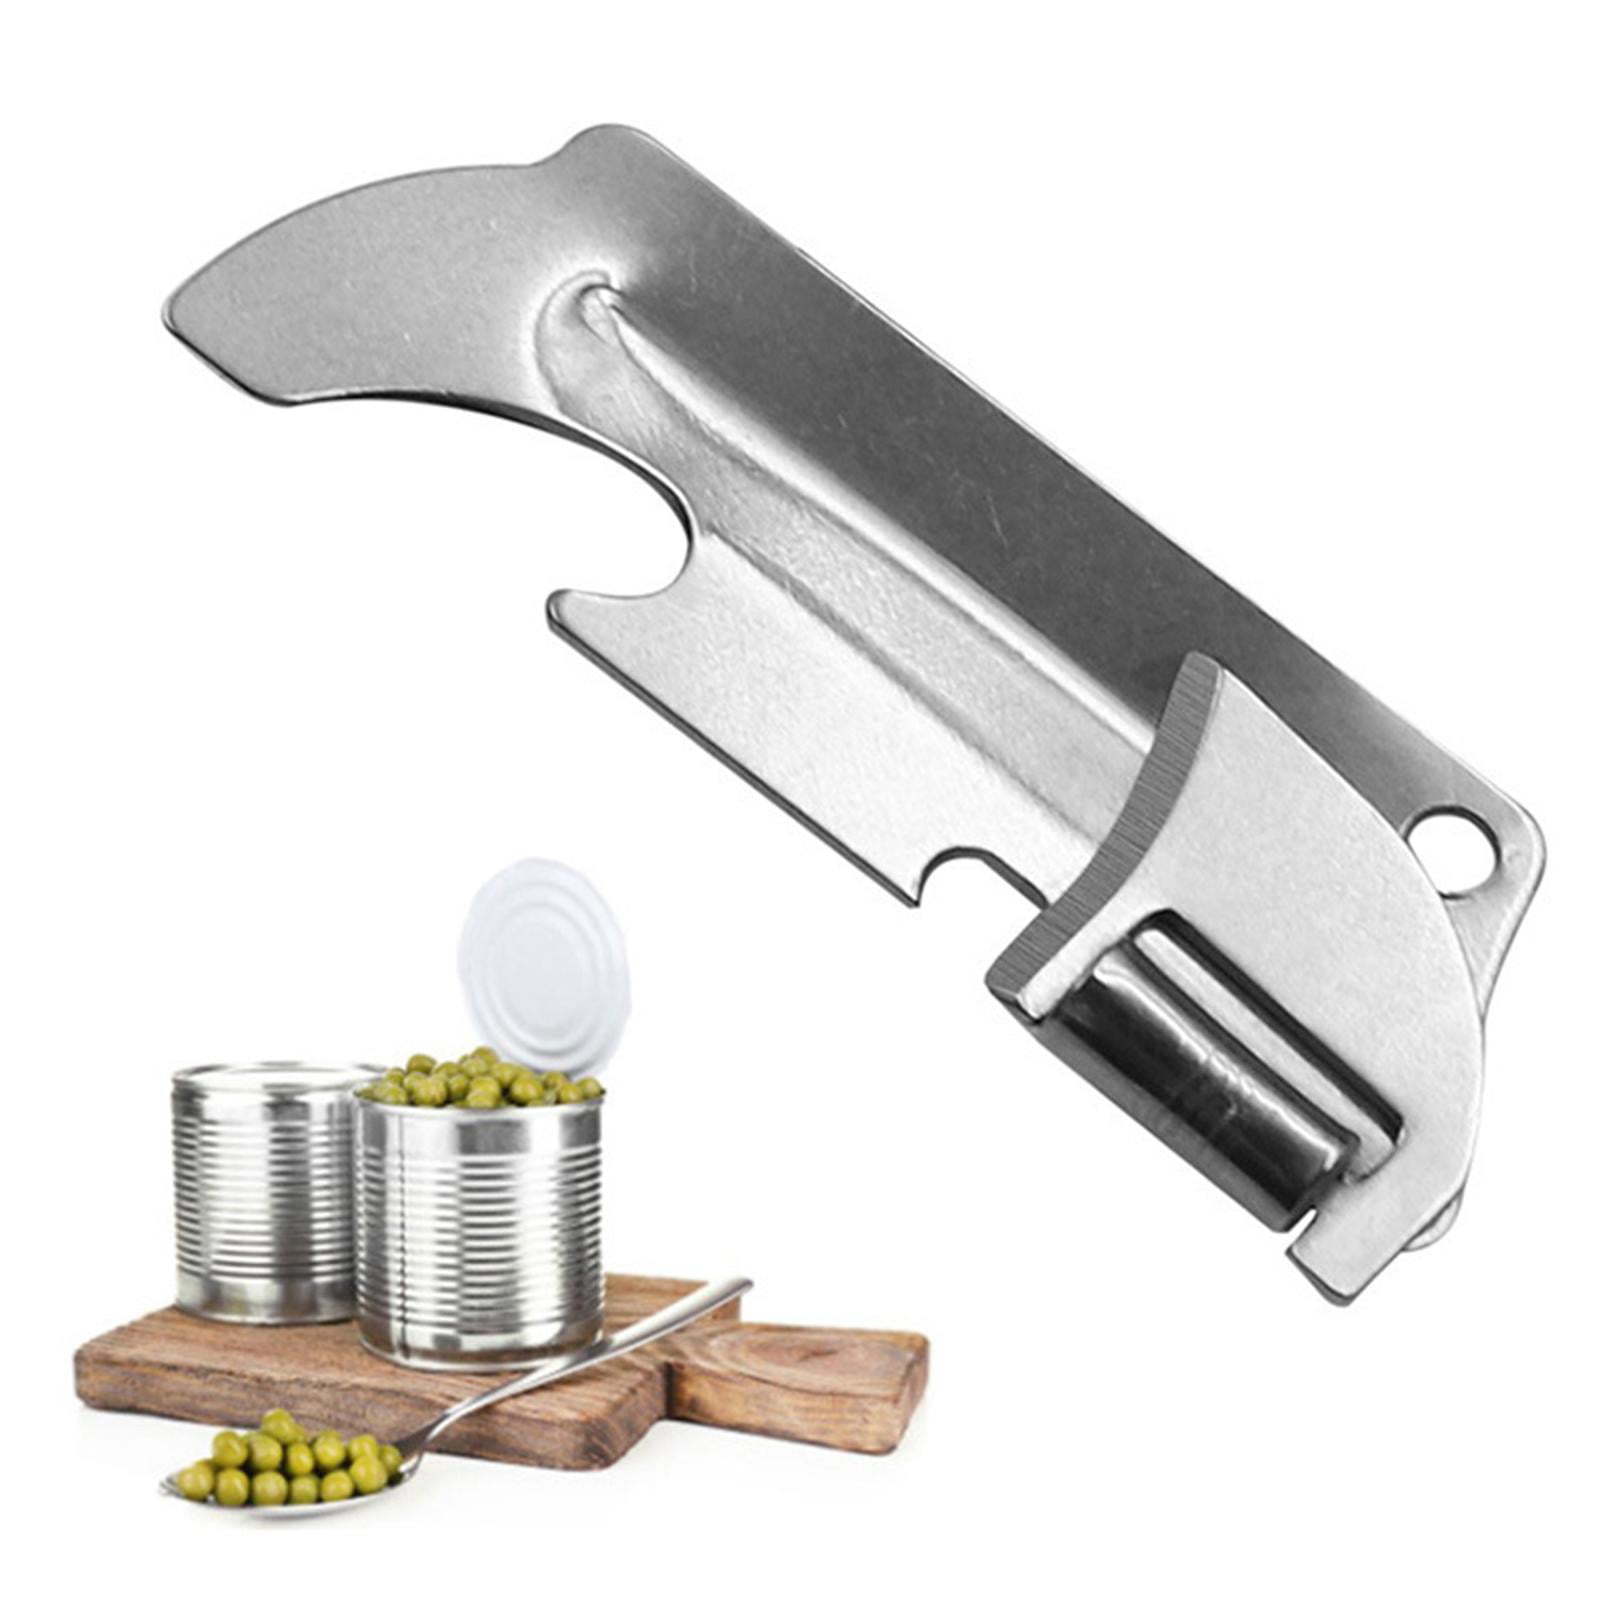 5pcs Stainless Steel Military Style Can Opener - Portable Survival Kit for  Camping, Travel, and Emergencies